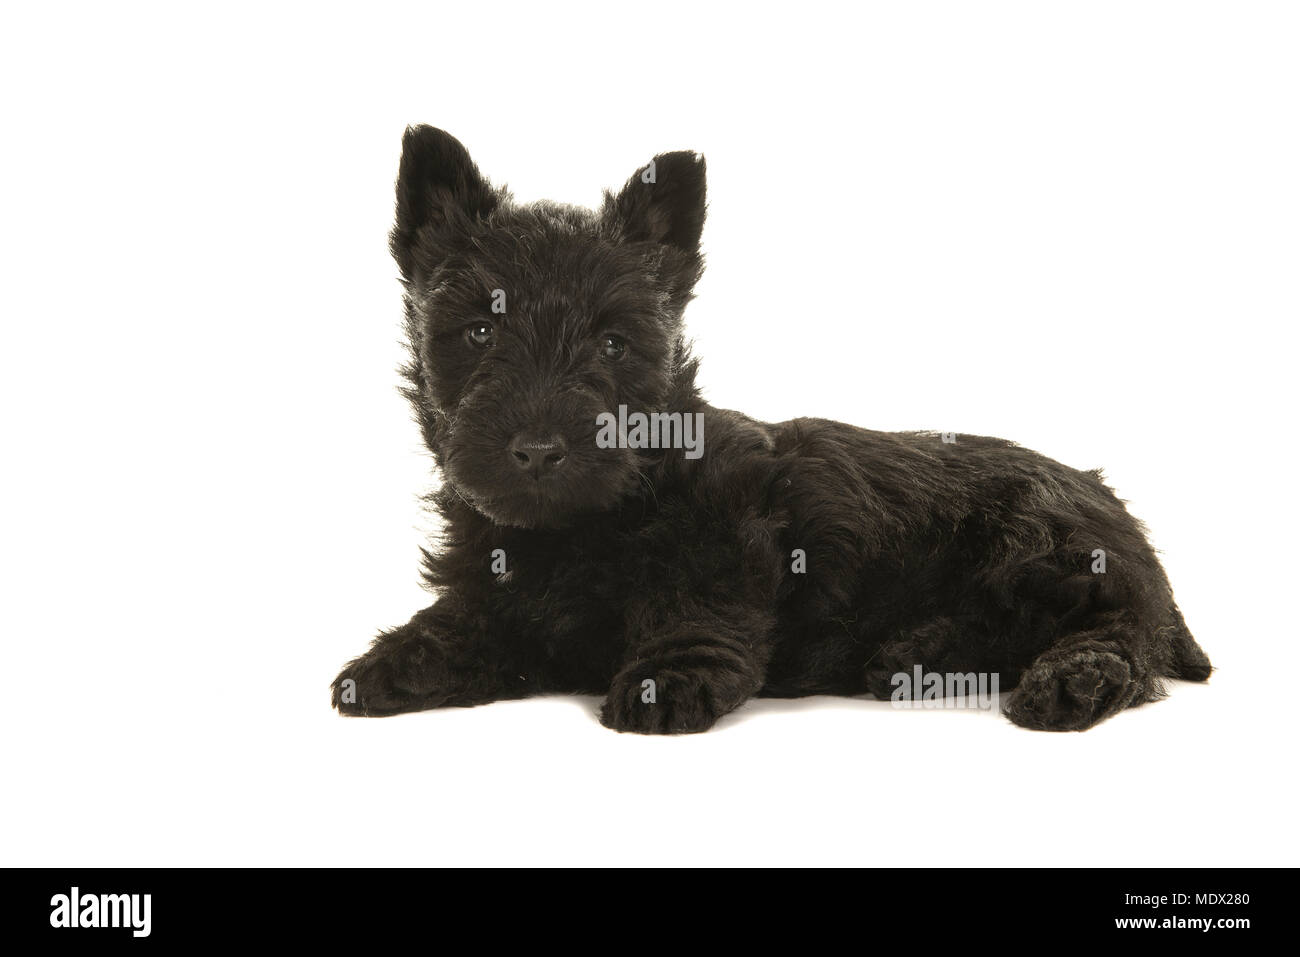 Cute black scottish terrier puppy lying down seen from the side looking at the camera isolated on a white background Stock Photo